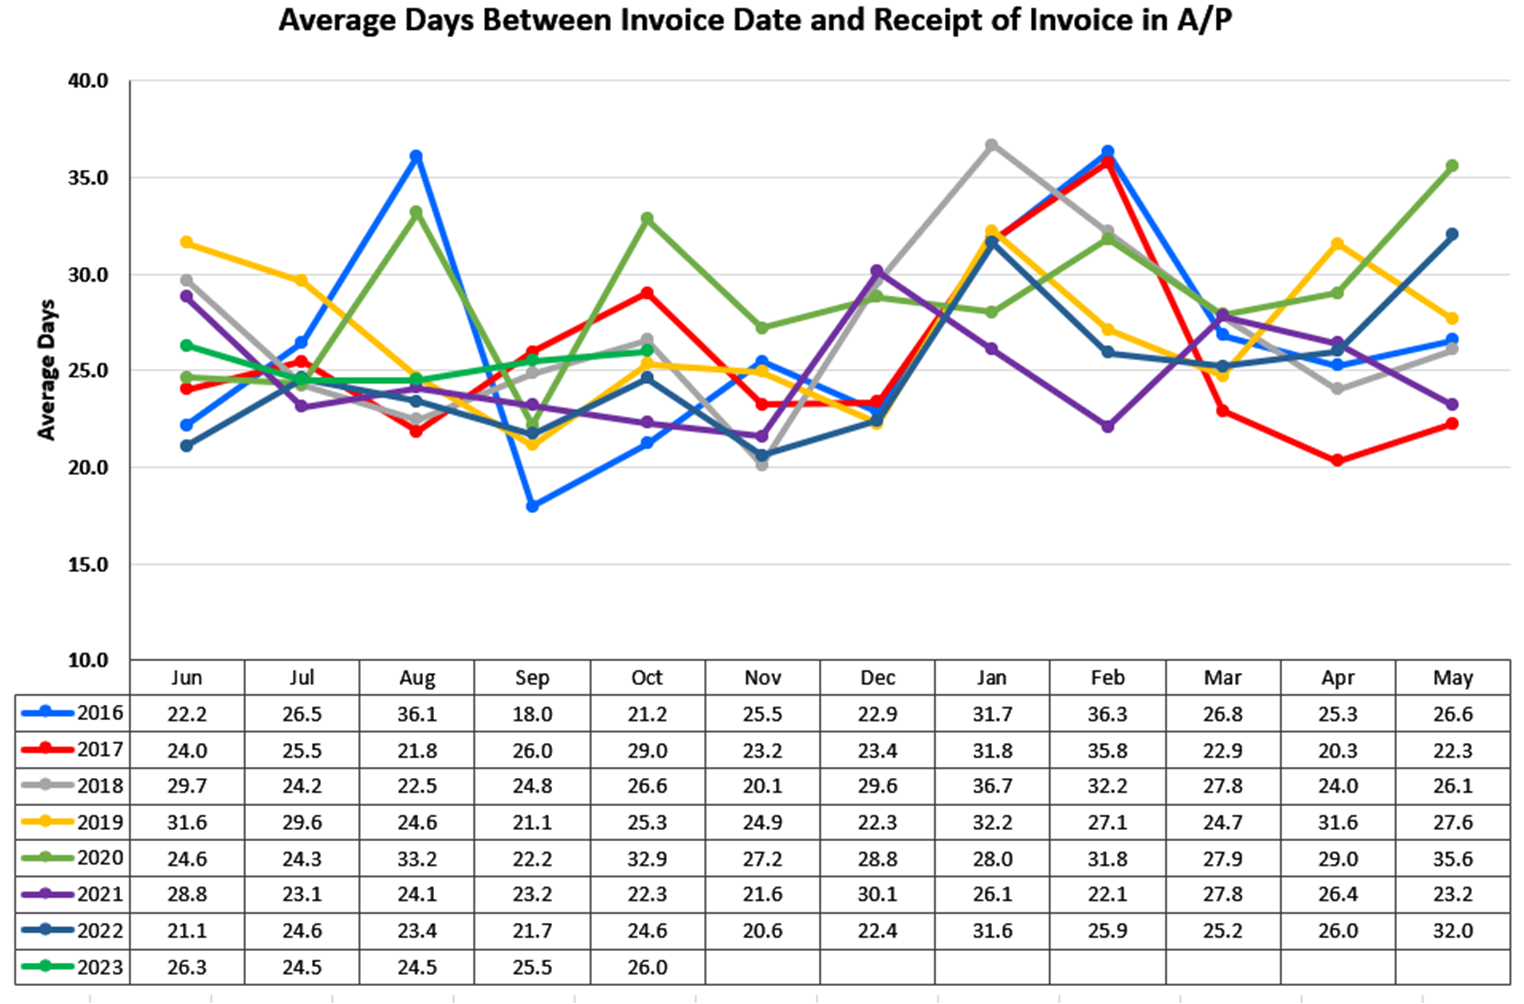 Average Days Between Invoice Date and Receipt of Invoice in A/P